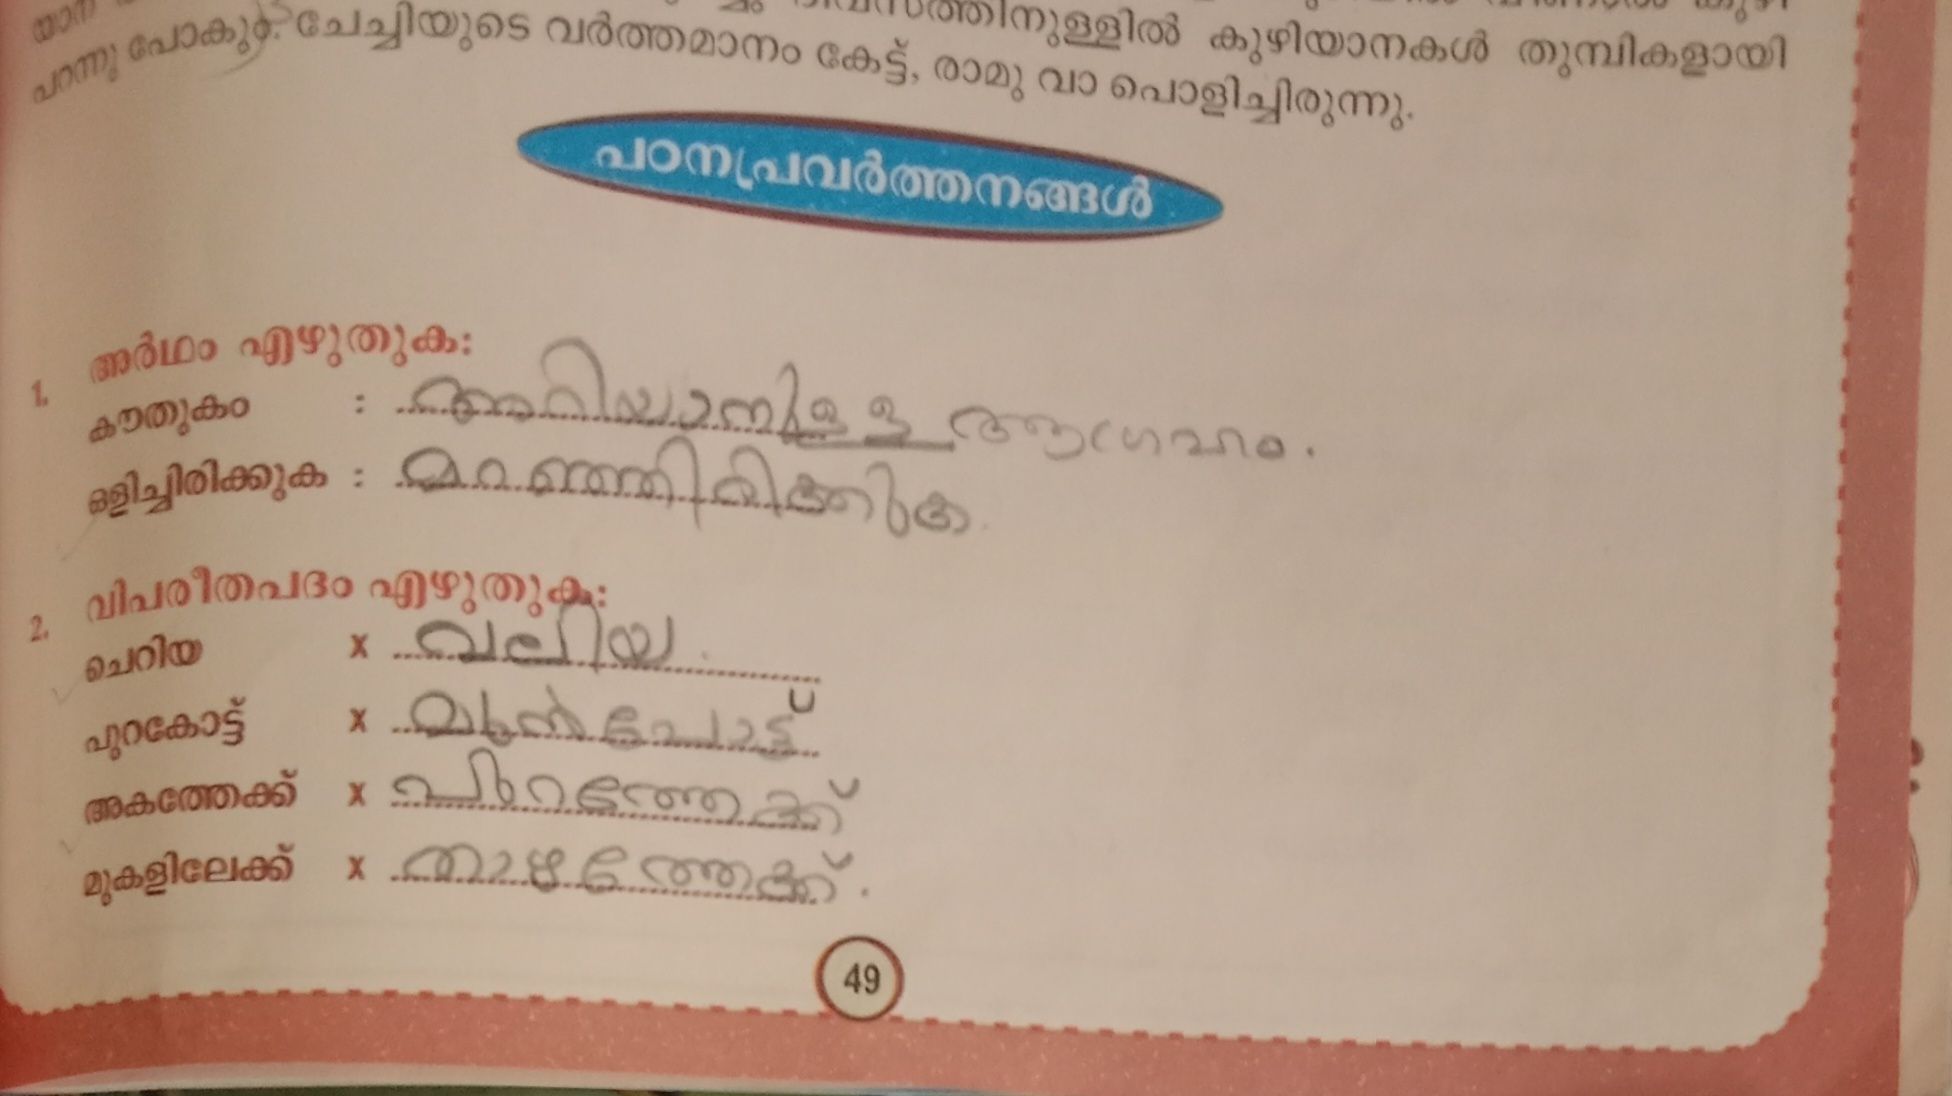 malayalam of assignment